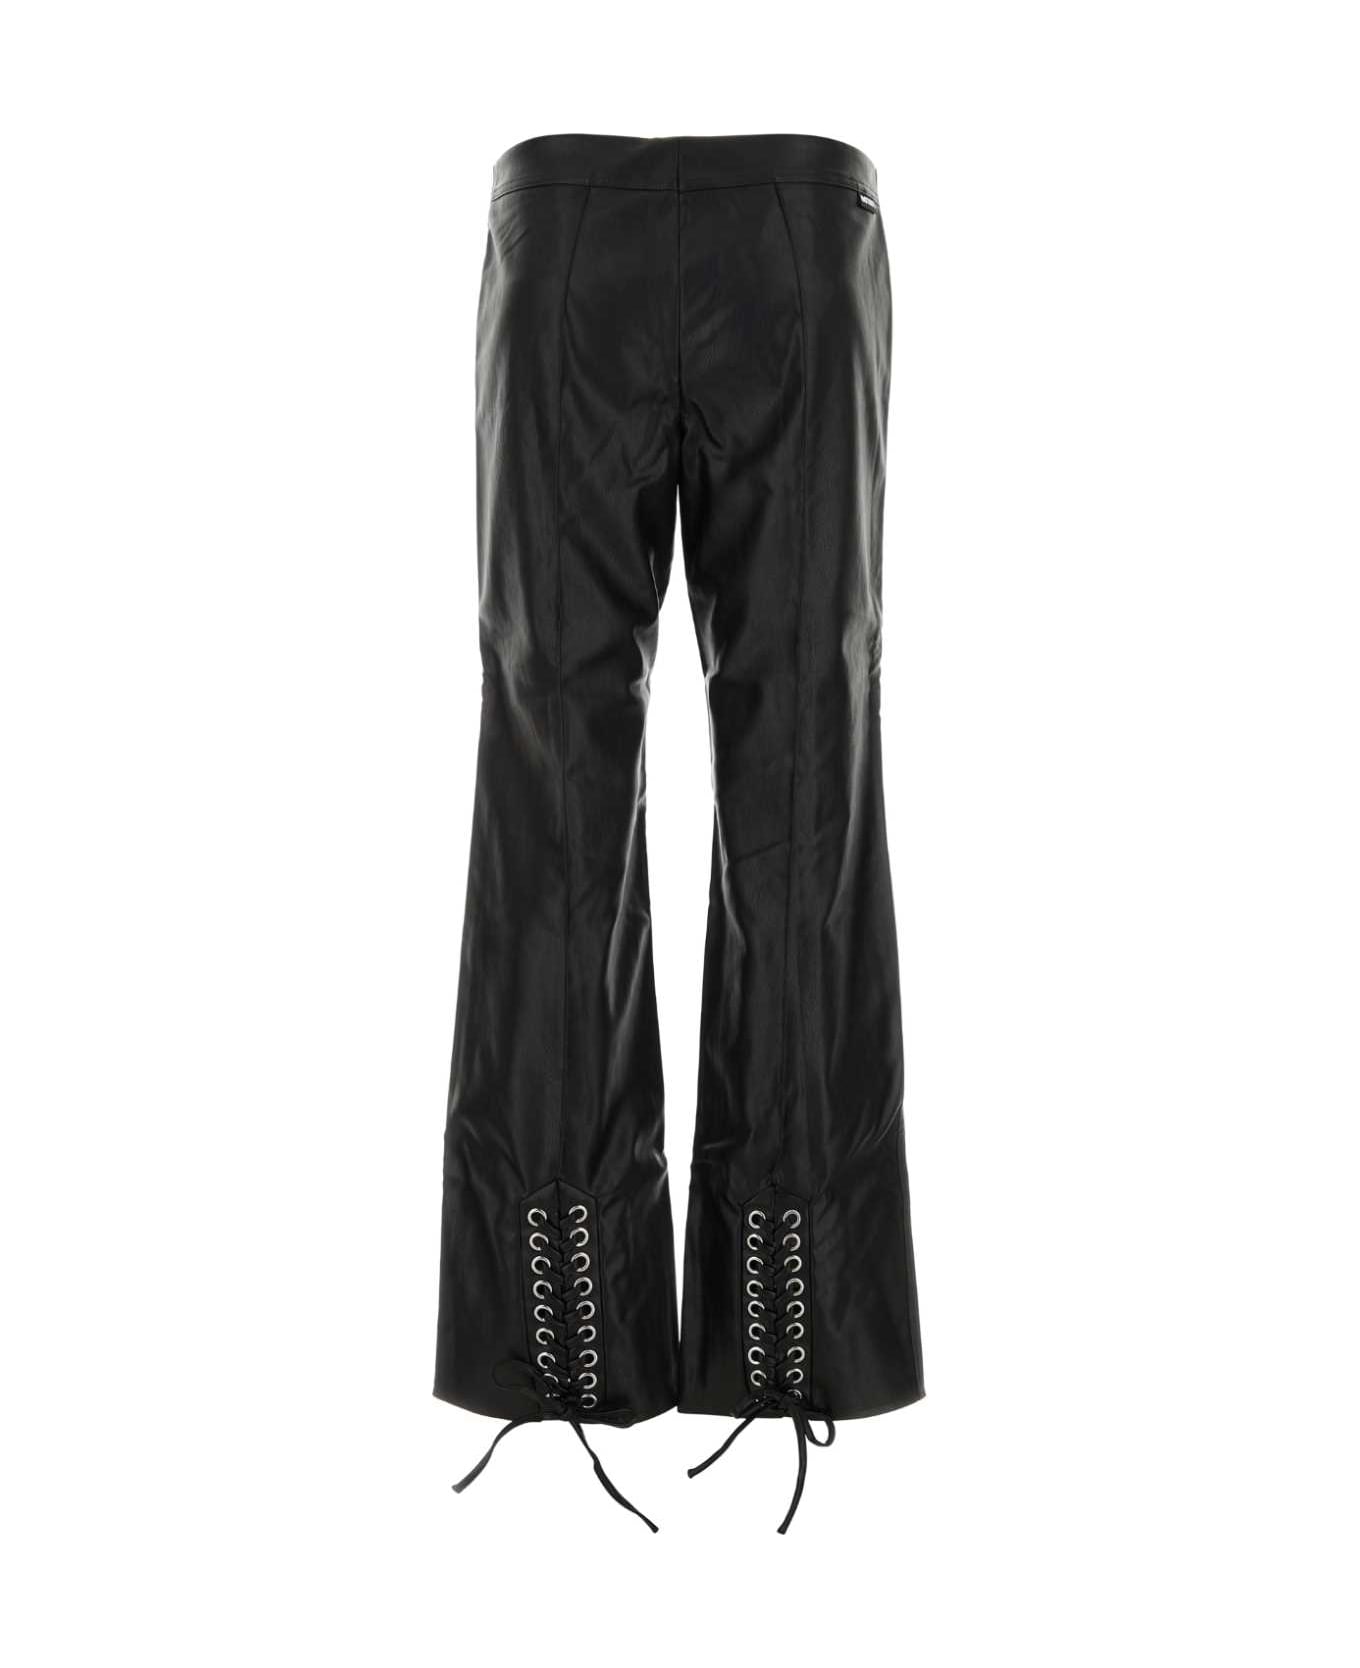 Rotate by Birger Christensen Black Synthetic Leather Pant - BLACK